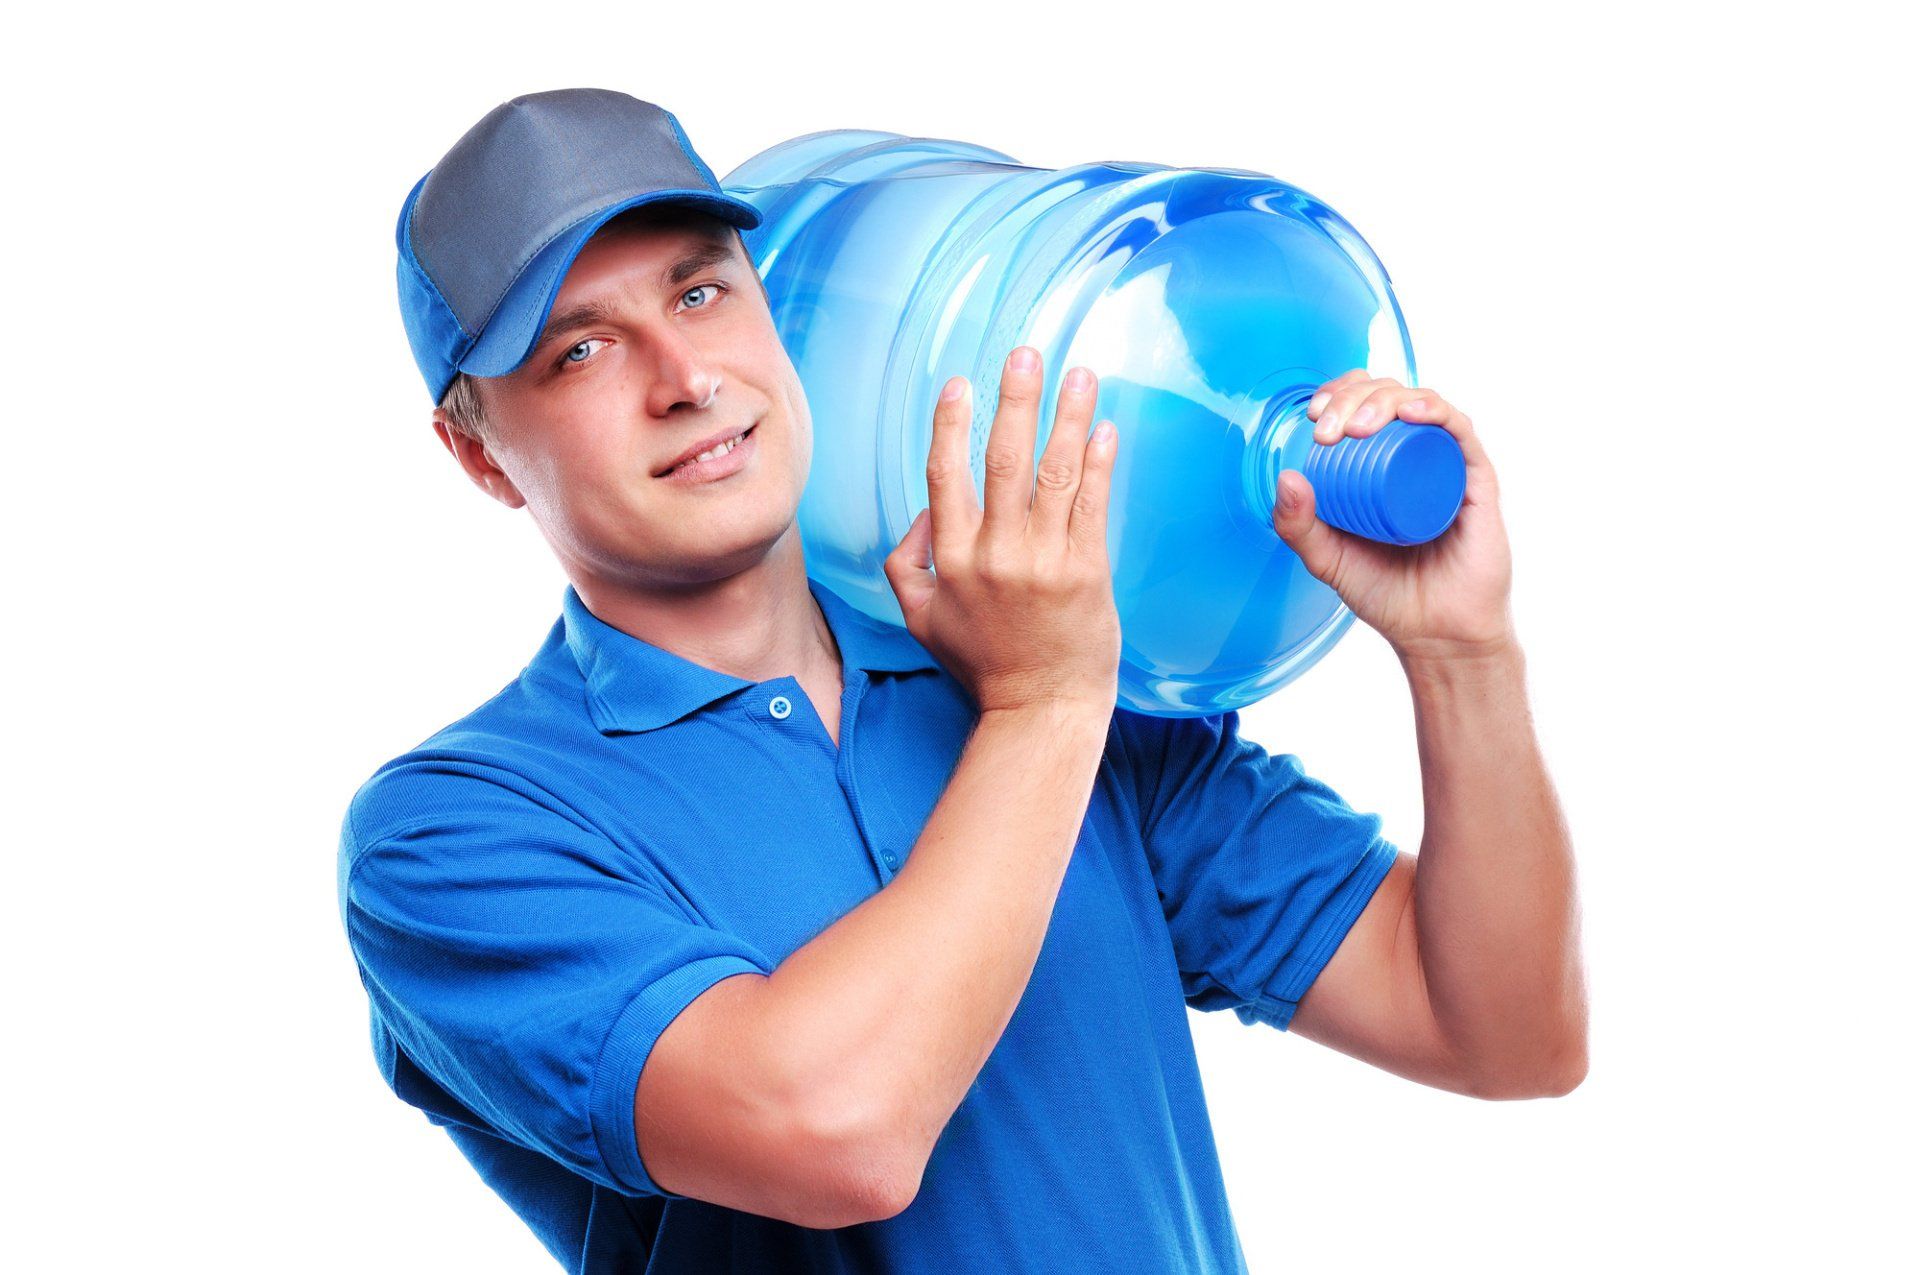 How Long Does a five-Gallon Water Jug Last?